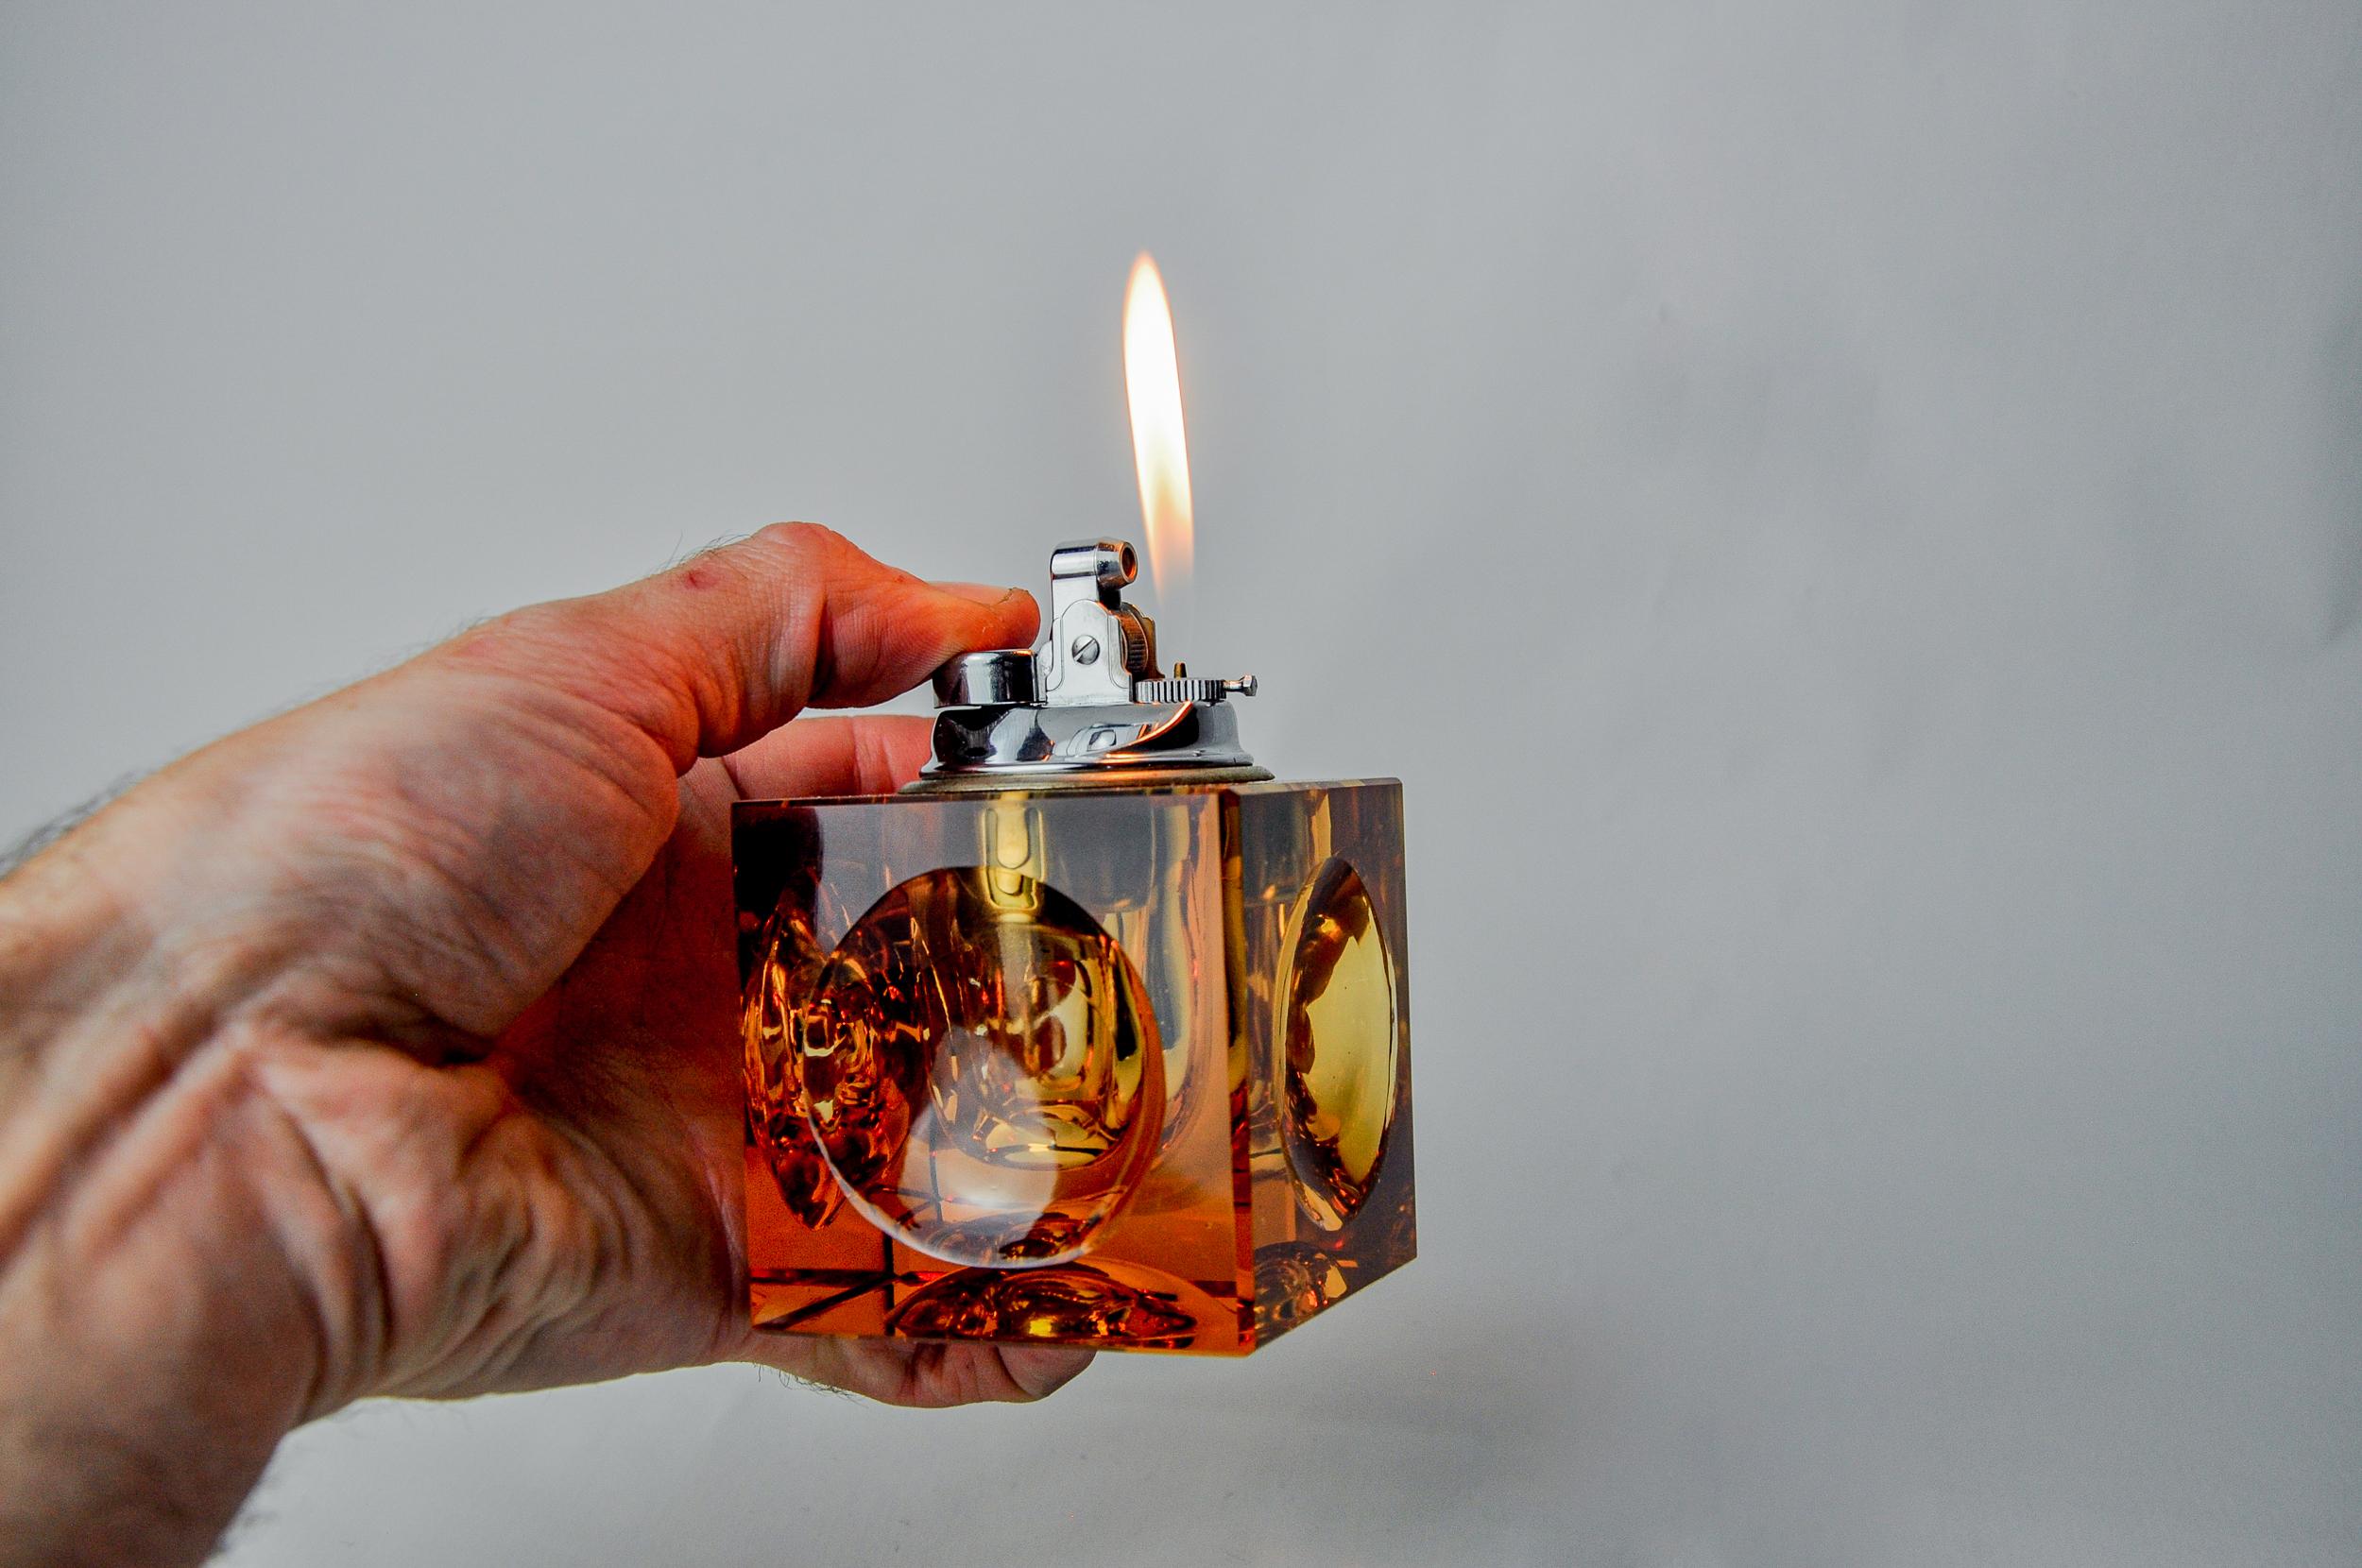 Superb and rare ice lighter designed and produced by antonio imperatore in italy in the 1970s. Ashtray in orange murano glass with a magnifying effect on its facets, handcrafted by venetian master glassmakers. Decorative object that will bring a